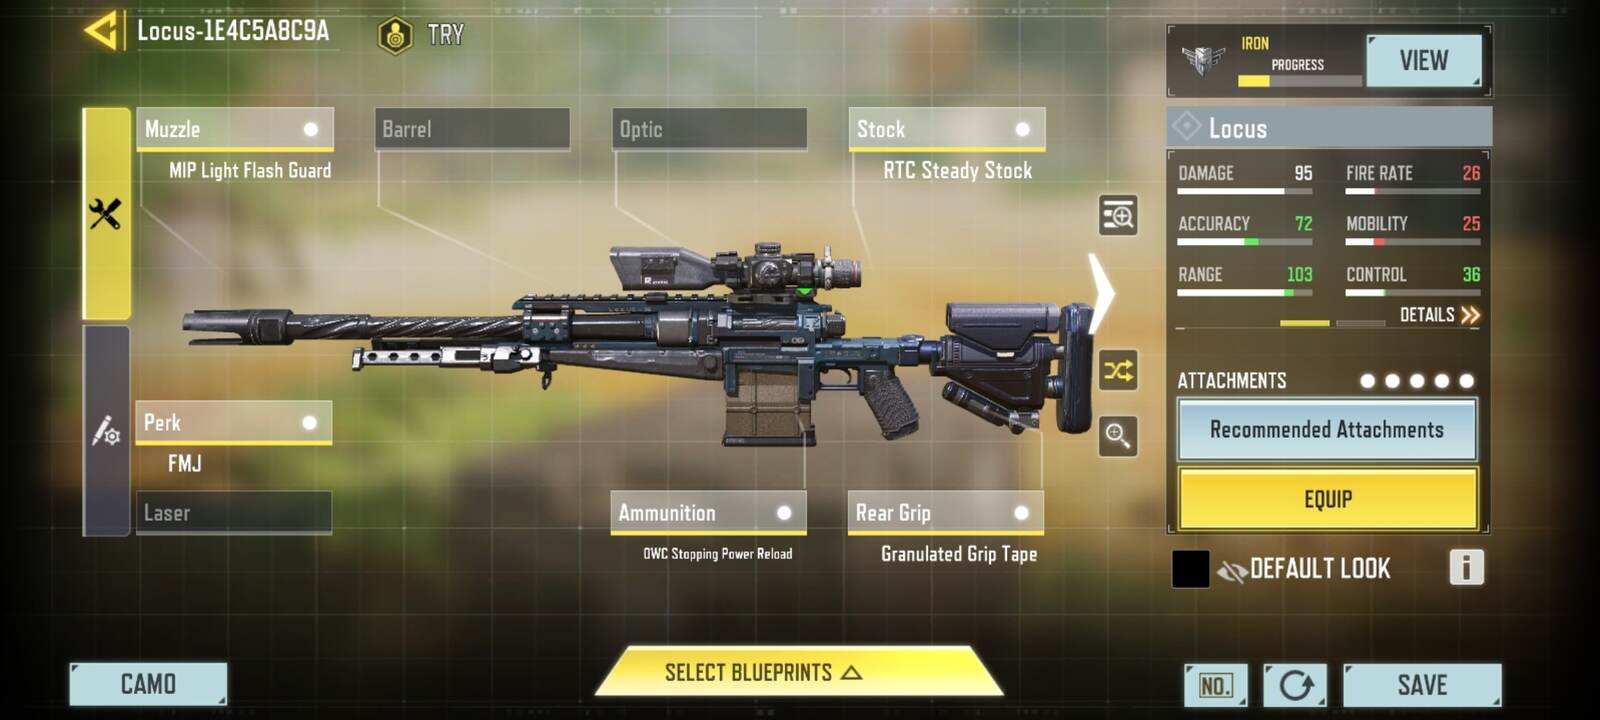 Bestes Locus-Loadout in COD Mobile in Battle Royale 